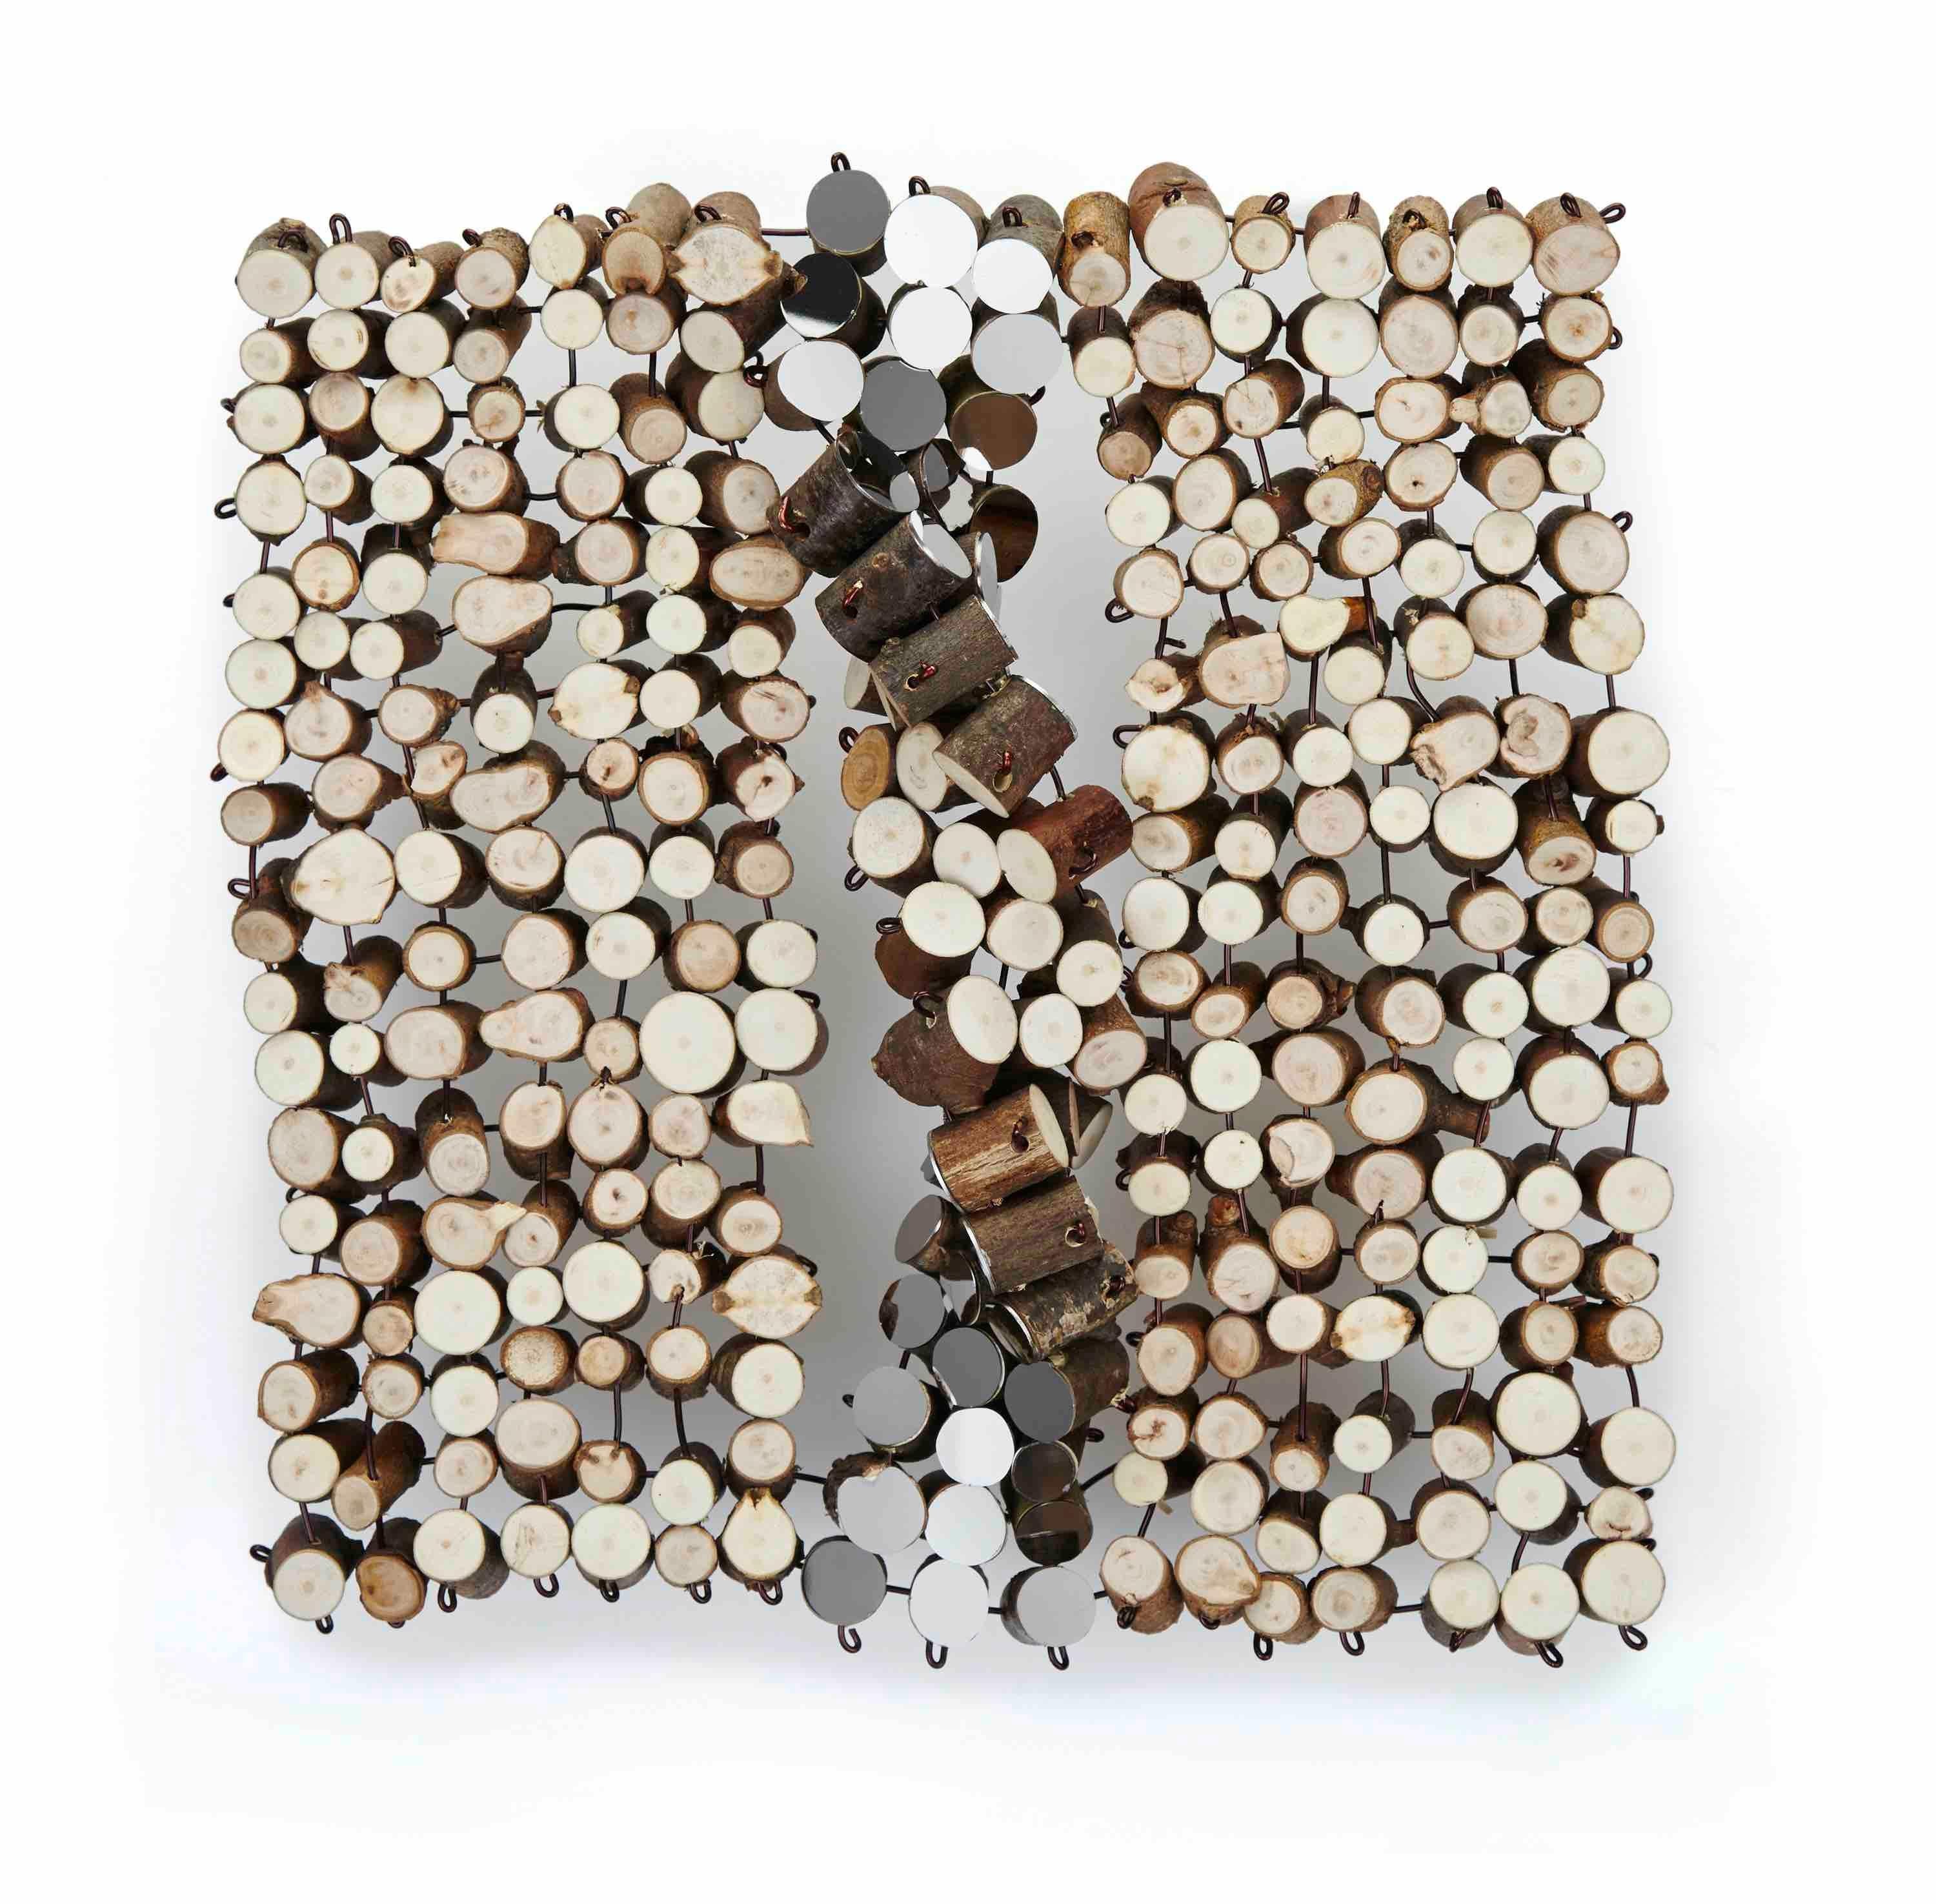 Twist Tapestry: A Sculptural Wall Hanging of Mirrors and Fallen Wood - Mixed Media Art by Lee Borthwick